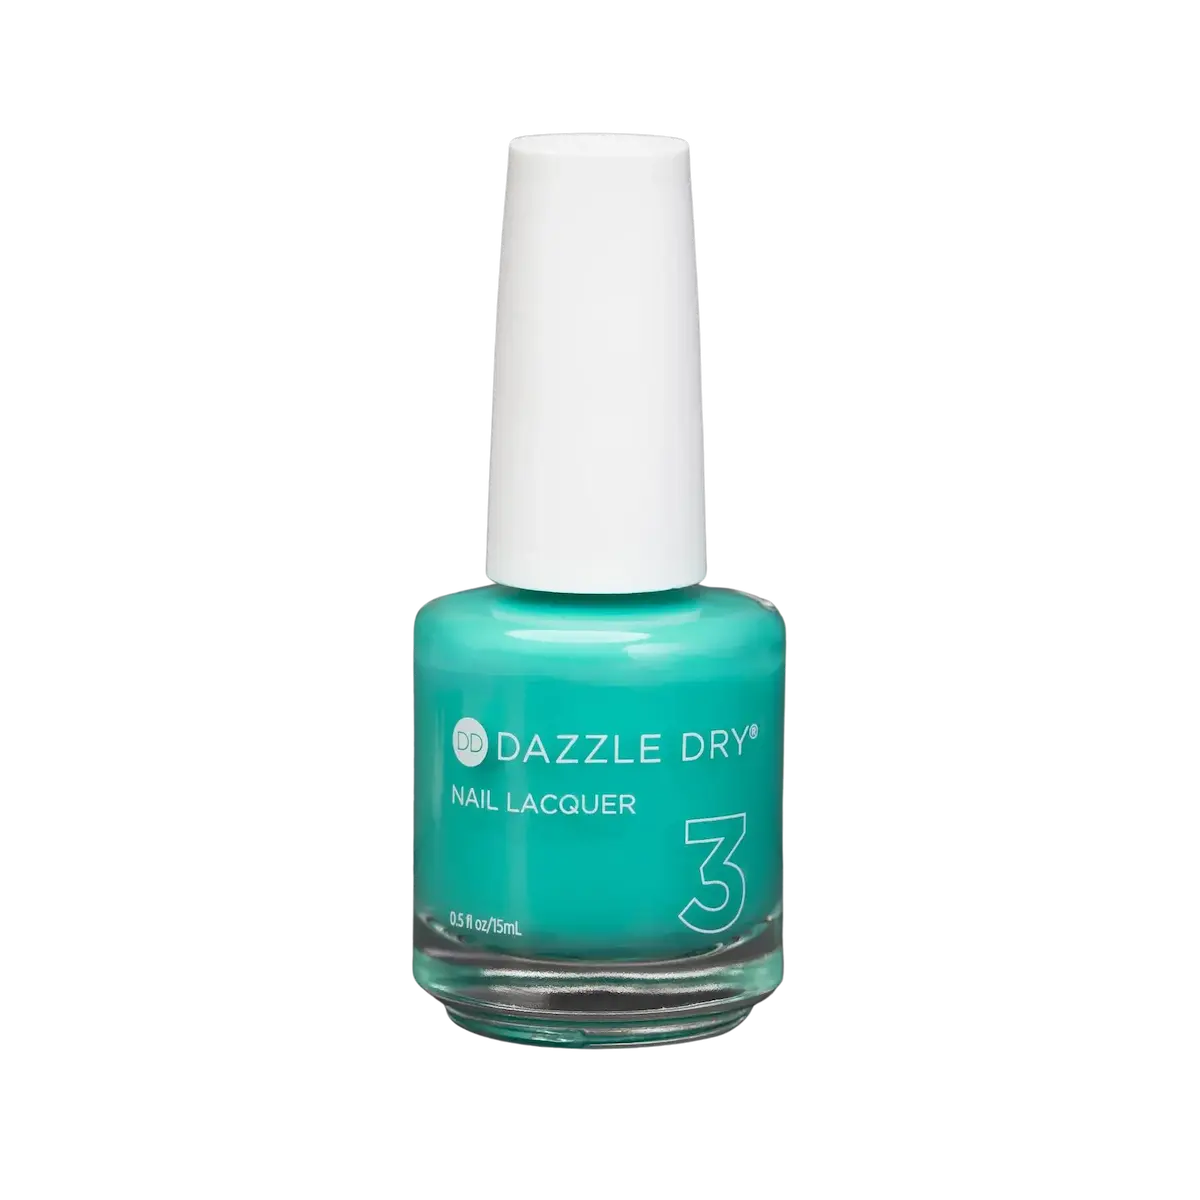 Dazzle Dry Palm Springs Nail Lacquer